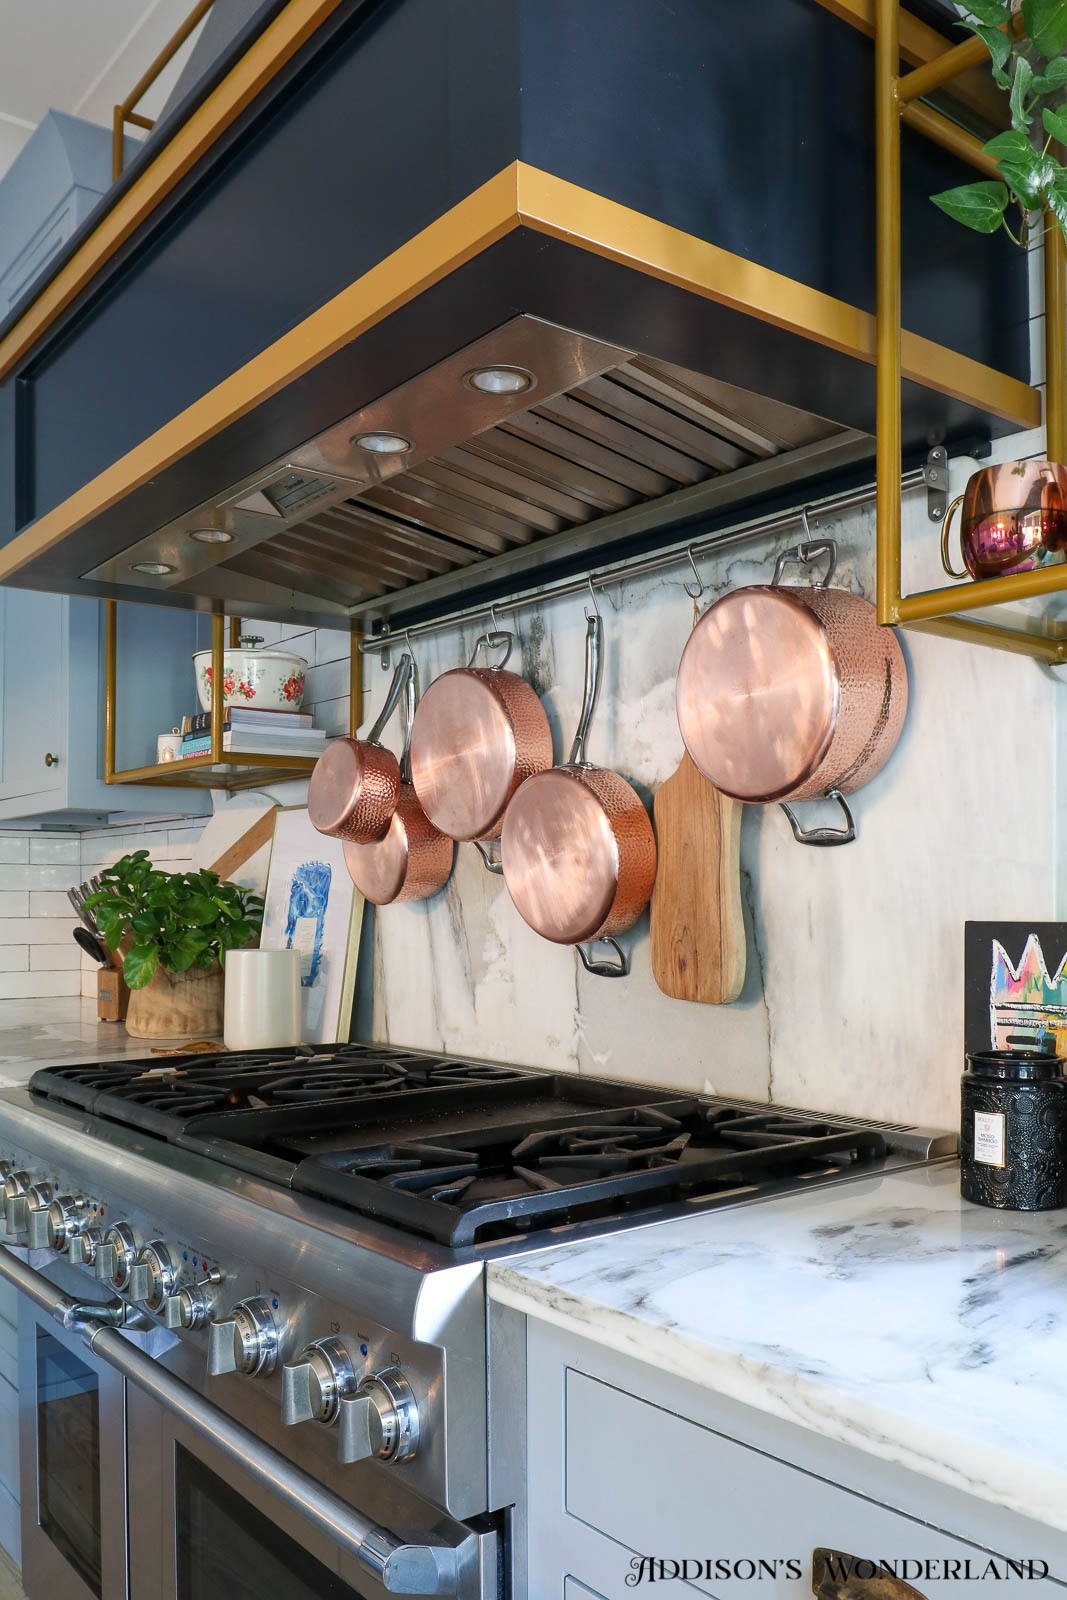 How to Clean Copper Pots and Pans the Easy Way - Today's Homeowner